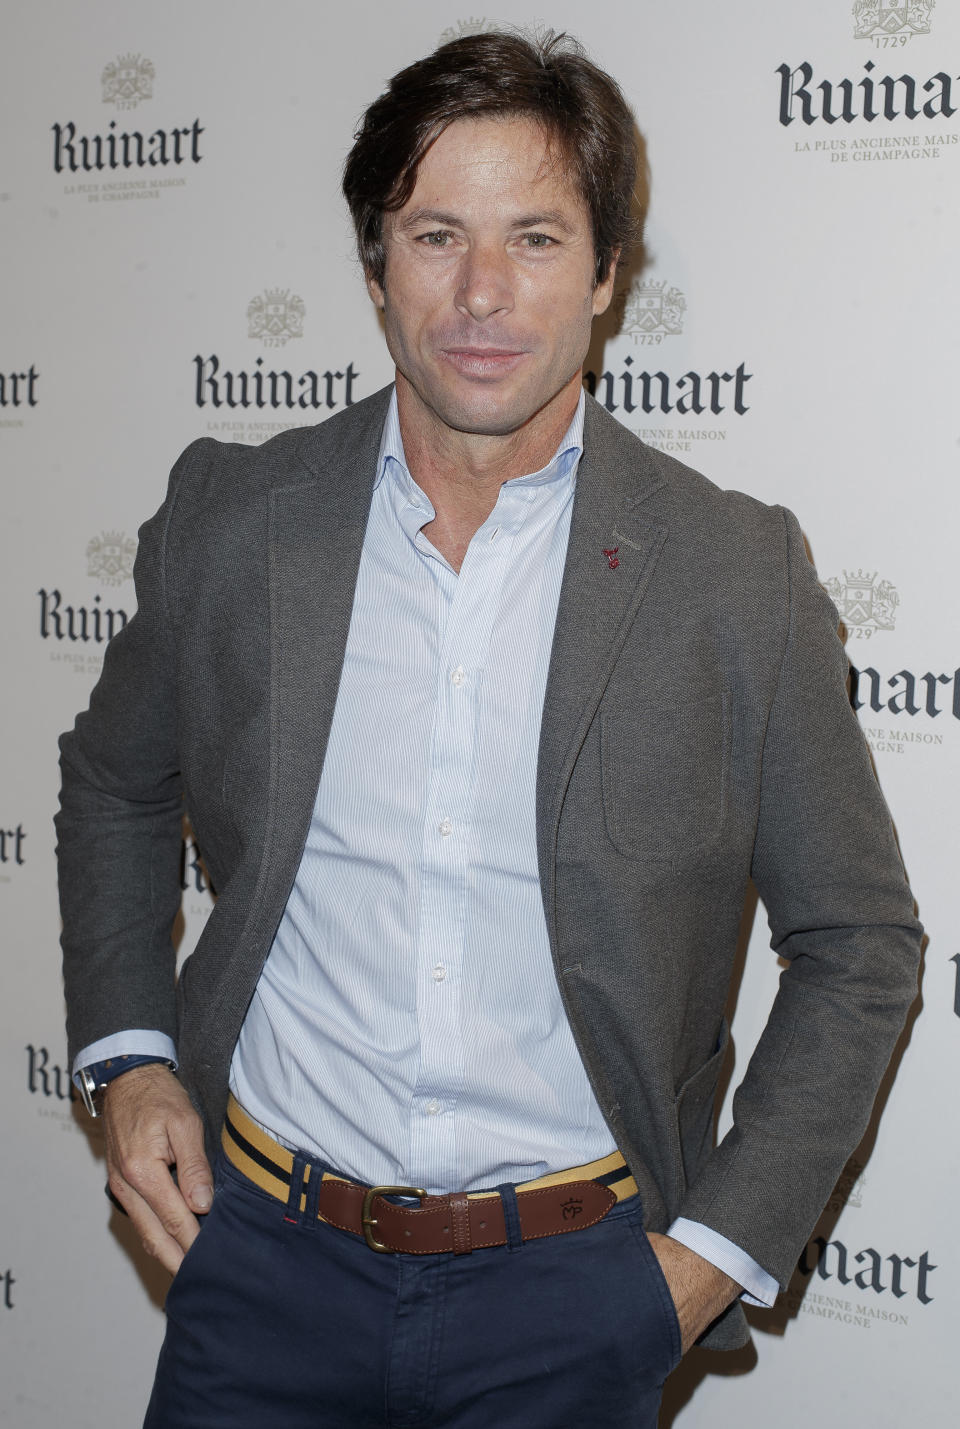 MADRID, SPAIN - NOVEMBER 05: Bullfighter Jose Antonio Canales Rivera attends the 'Ruinart Indian Oasis' oppening photocall at Ruinart Indian Oasis restaurant on November 05, 2018 in Madrid, Spain. (Photo by Eduardo Parra/WireImage)